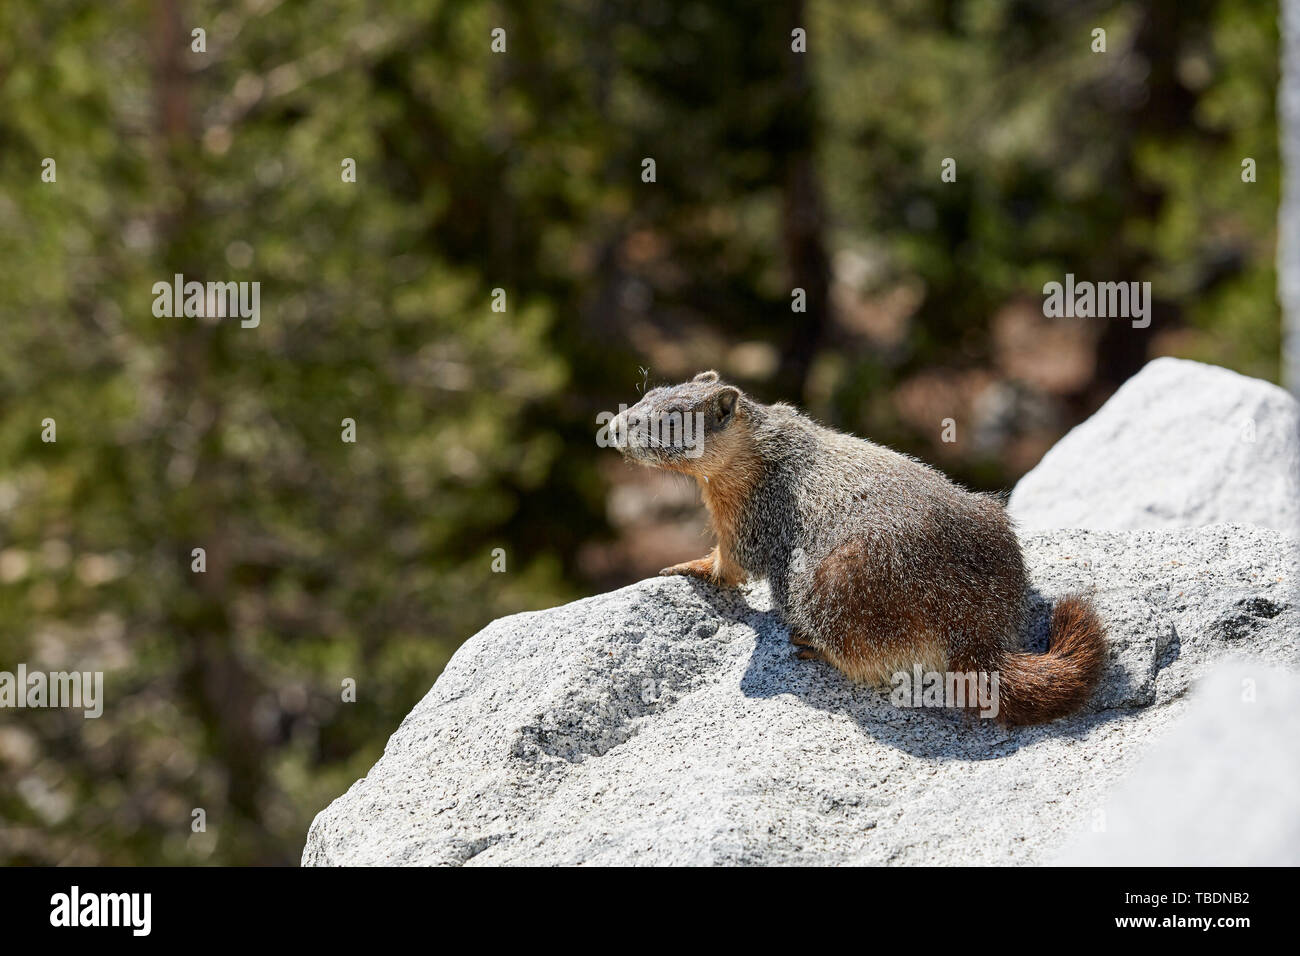 Ground squirrel on rock with nature background out of focus. Stock Photo